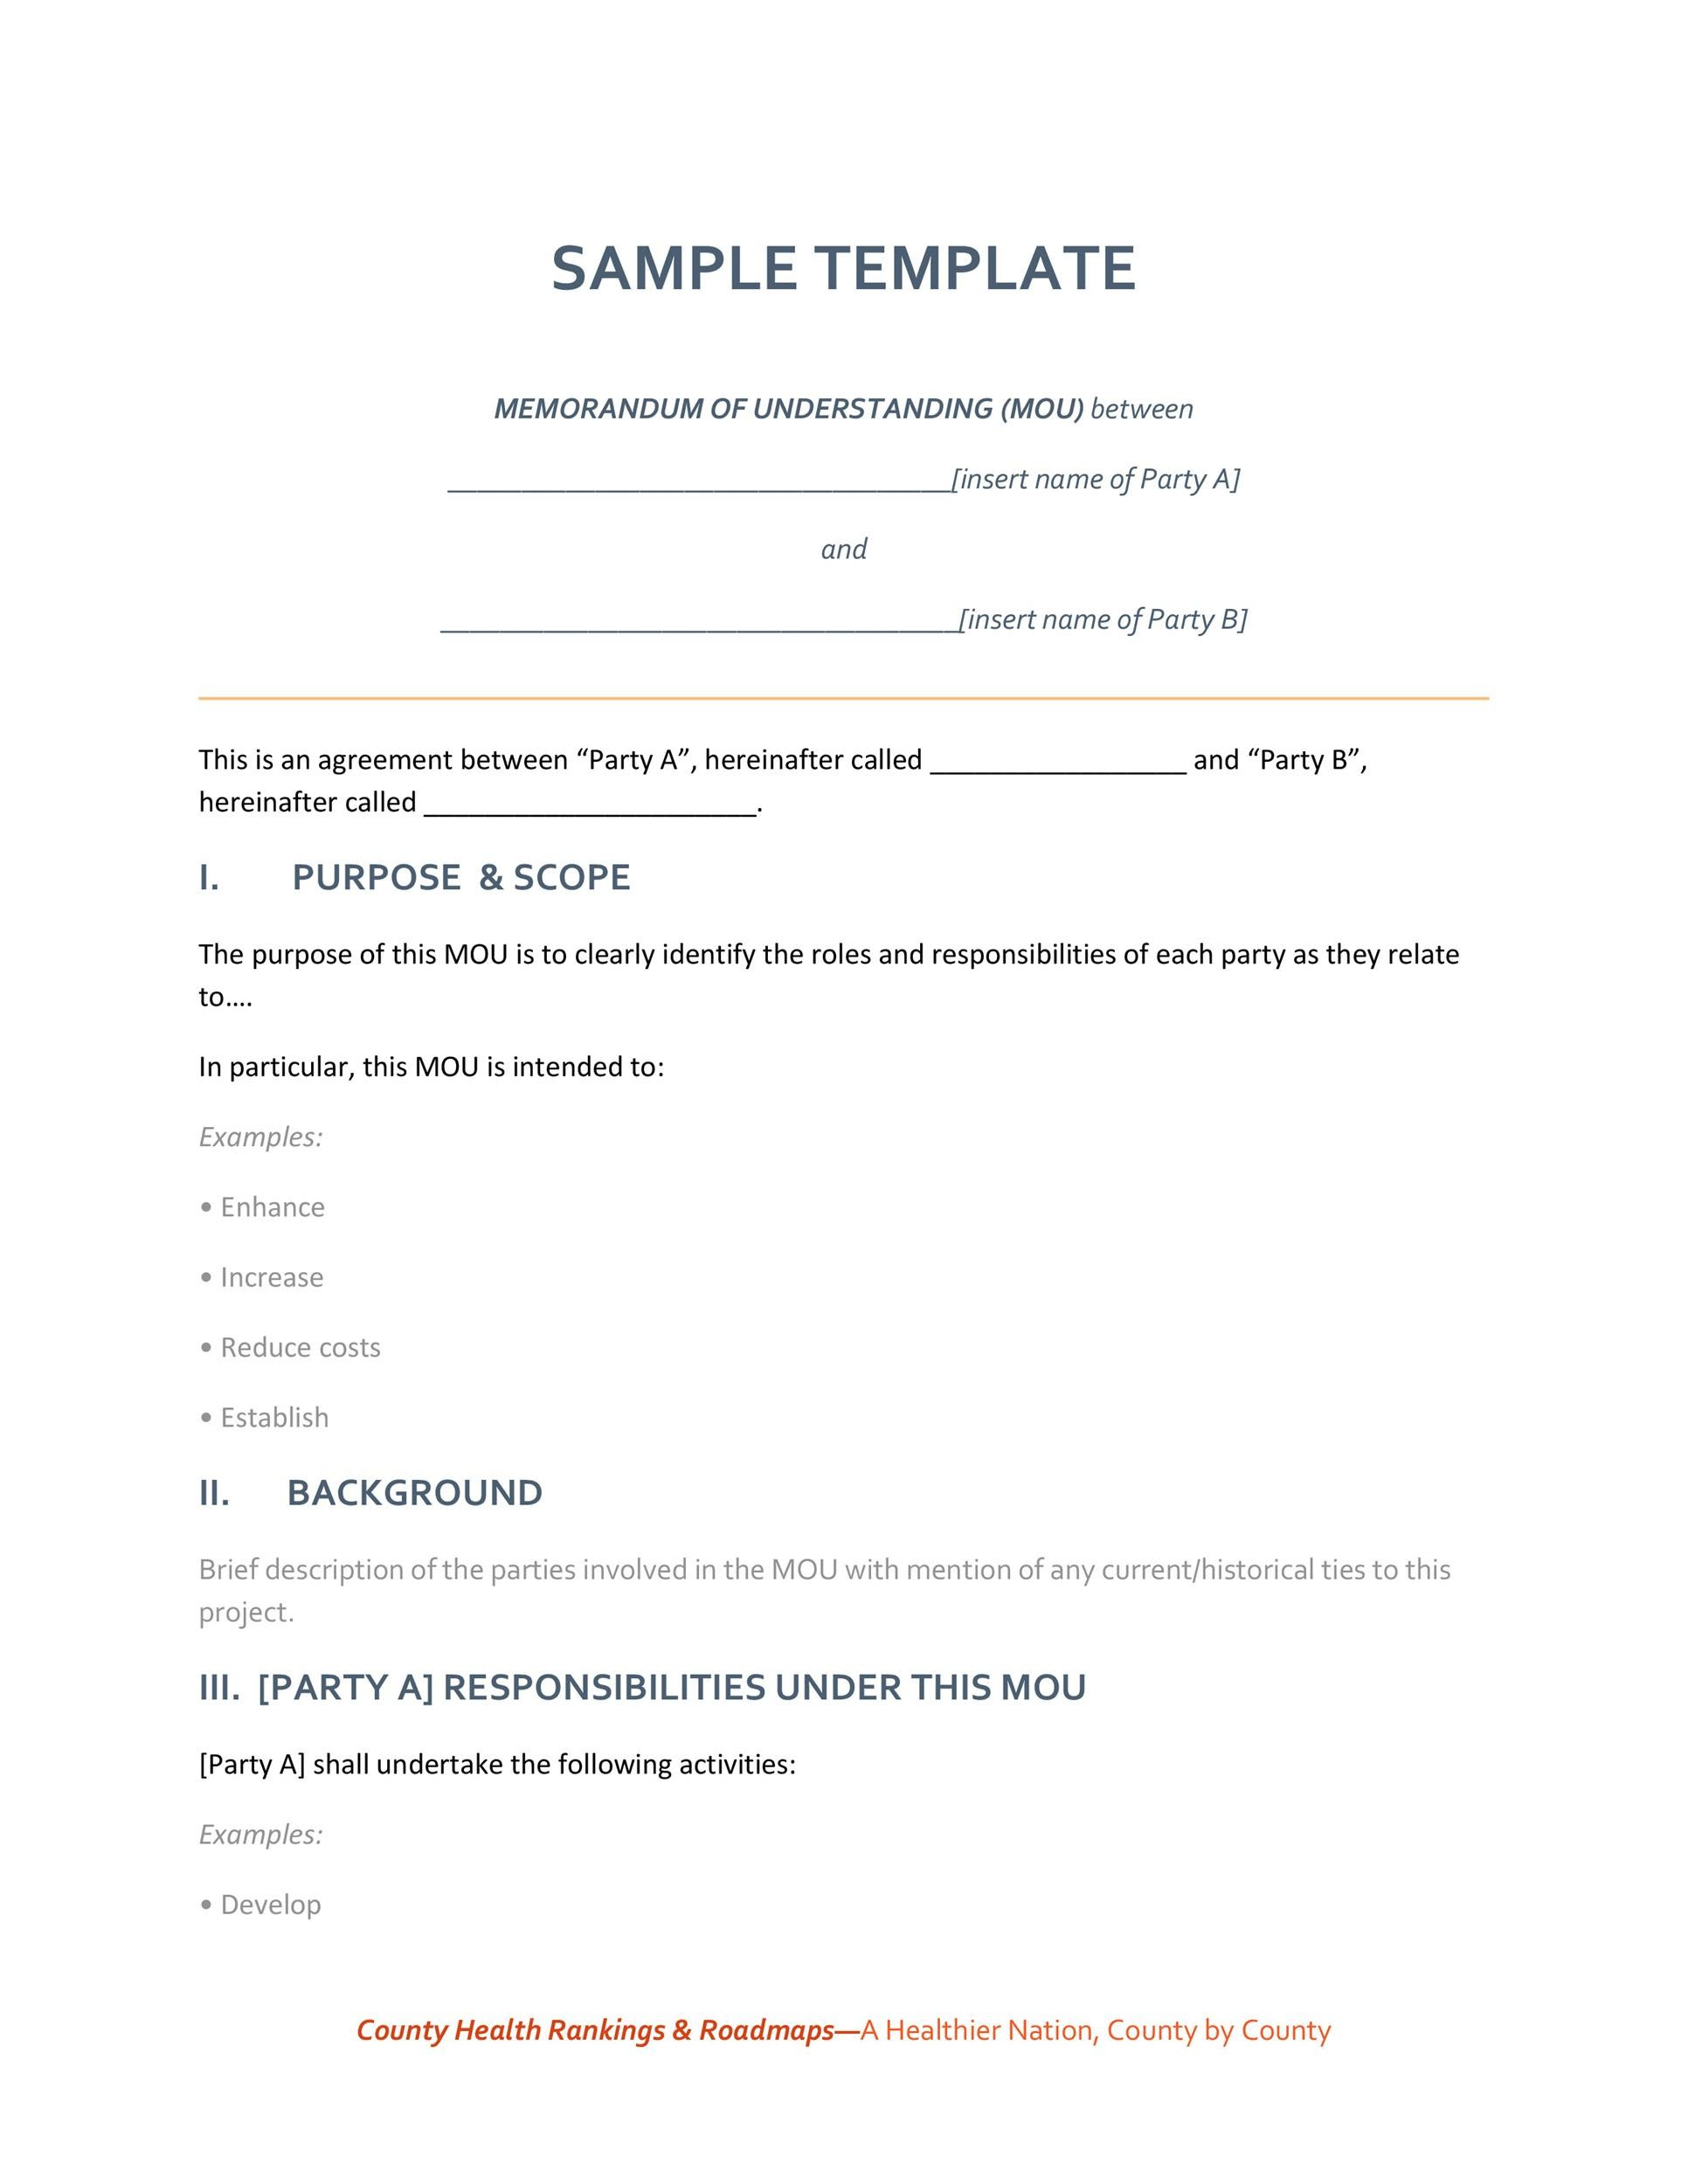 editable-us-navy-memorandum-template-excel-example-published-by-archie-fraser-memo-template